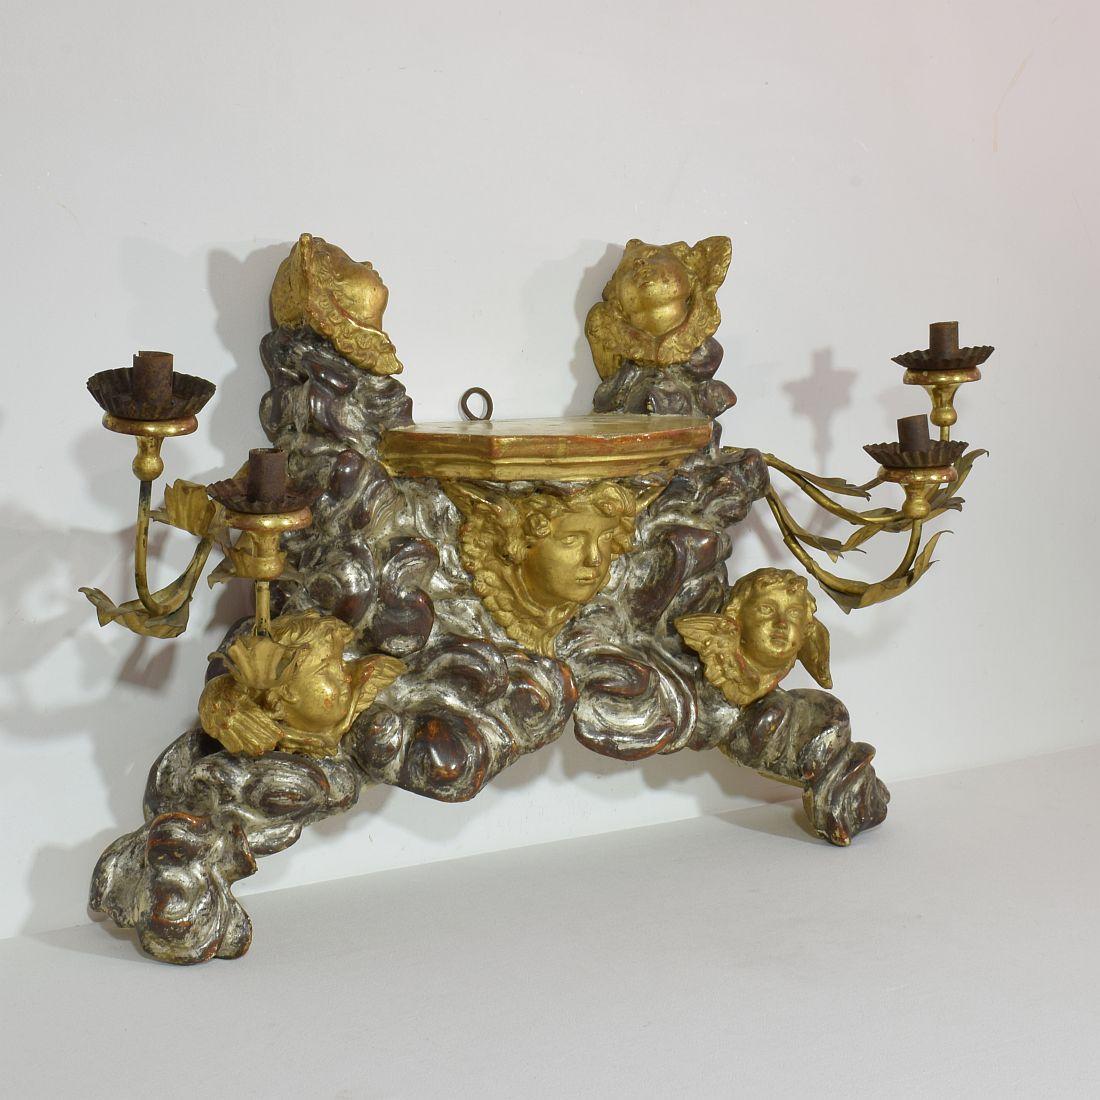 Hand-Carved 19th Century Italian Giltwood Baroque Style Altar with Candleholders and Angels